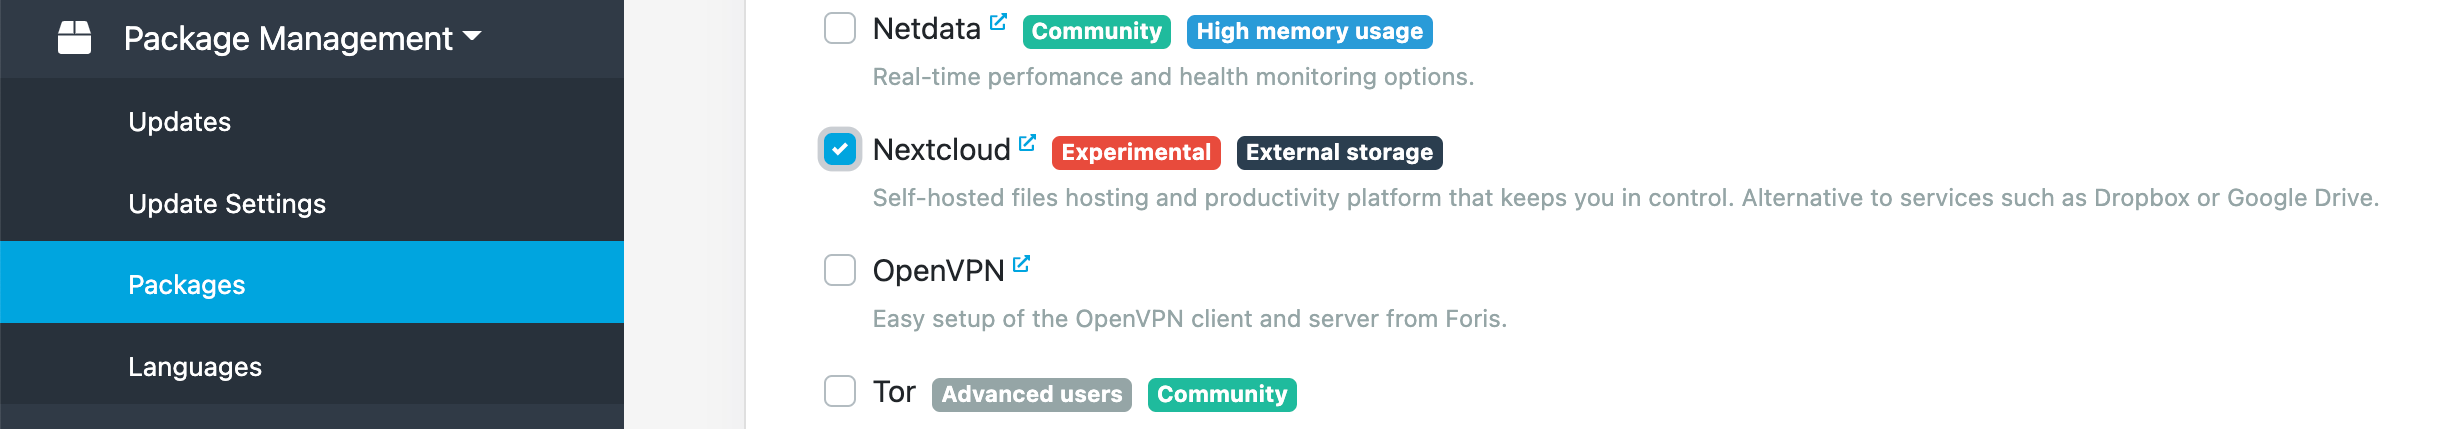 Nextcloud option in Package Lists